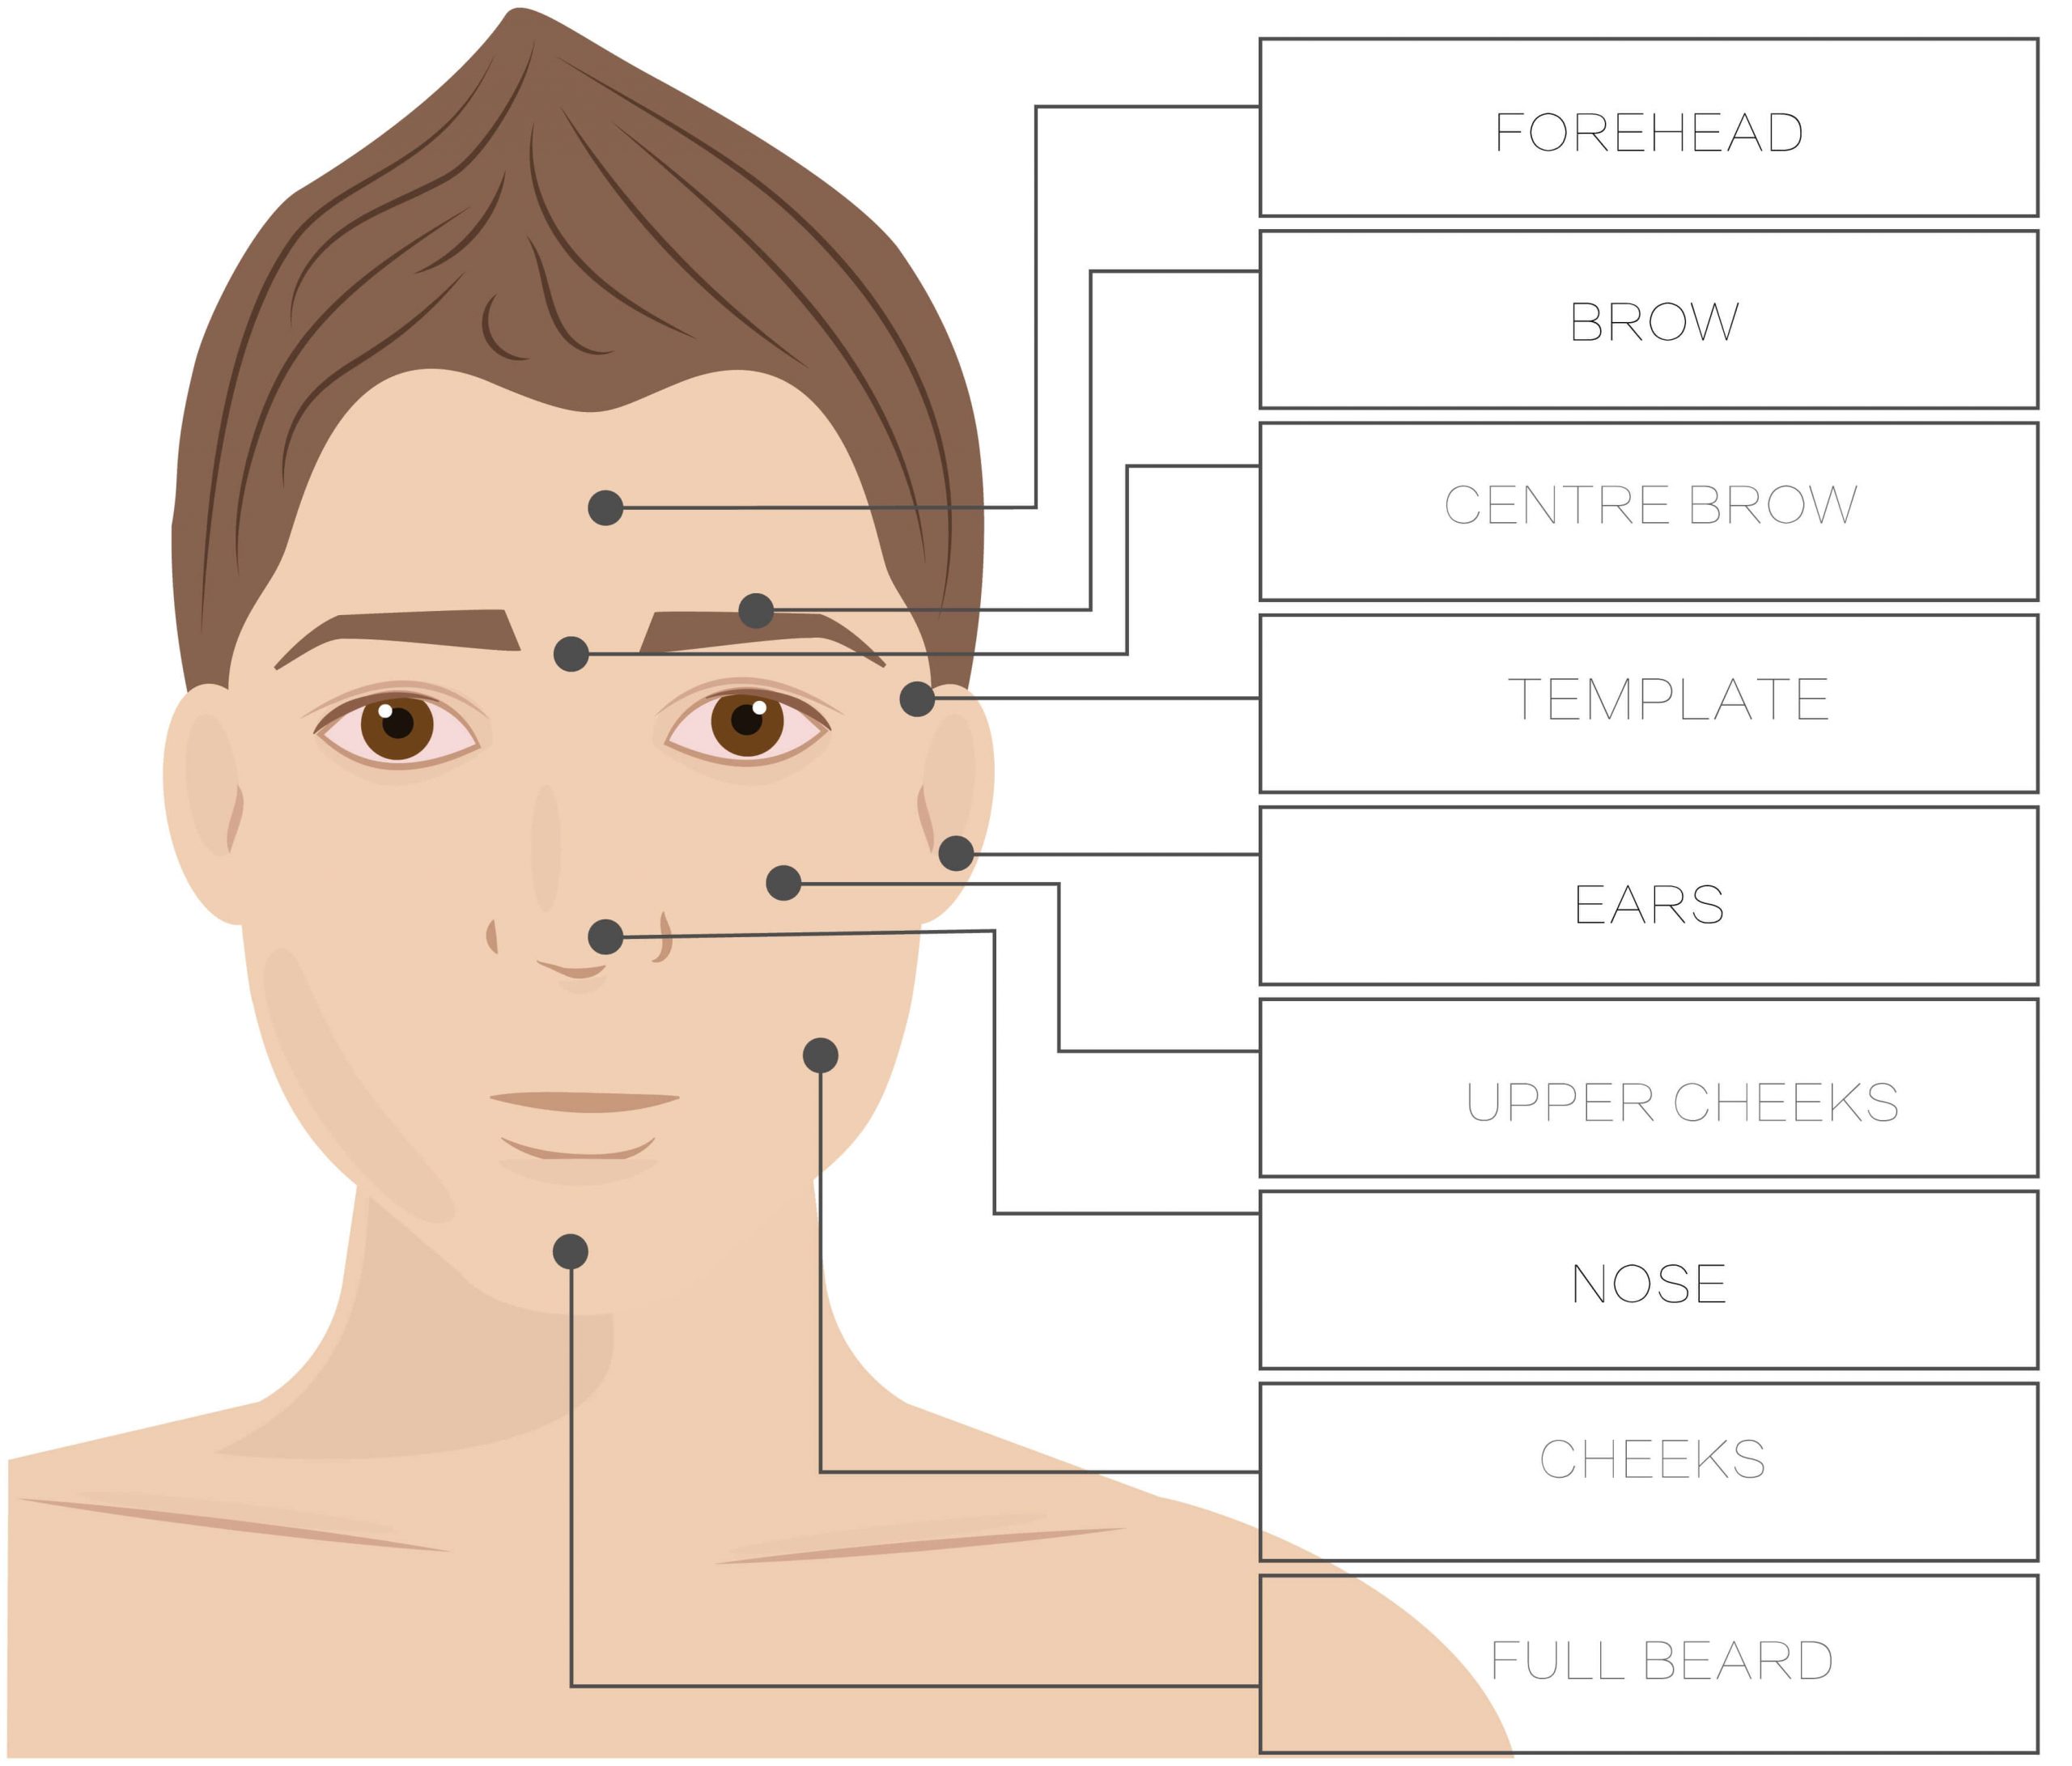 How To Remove Facial Hair - Top 9 Methods That Work